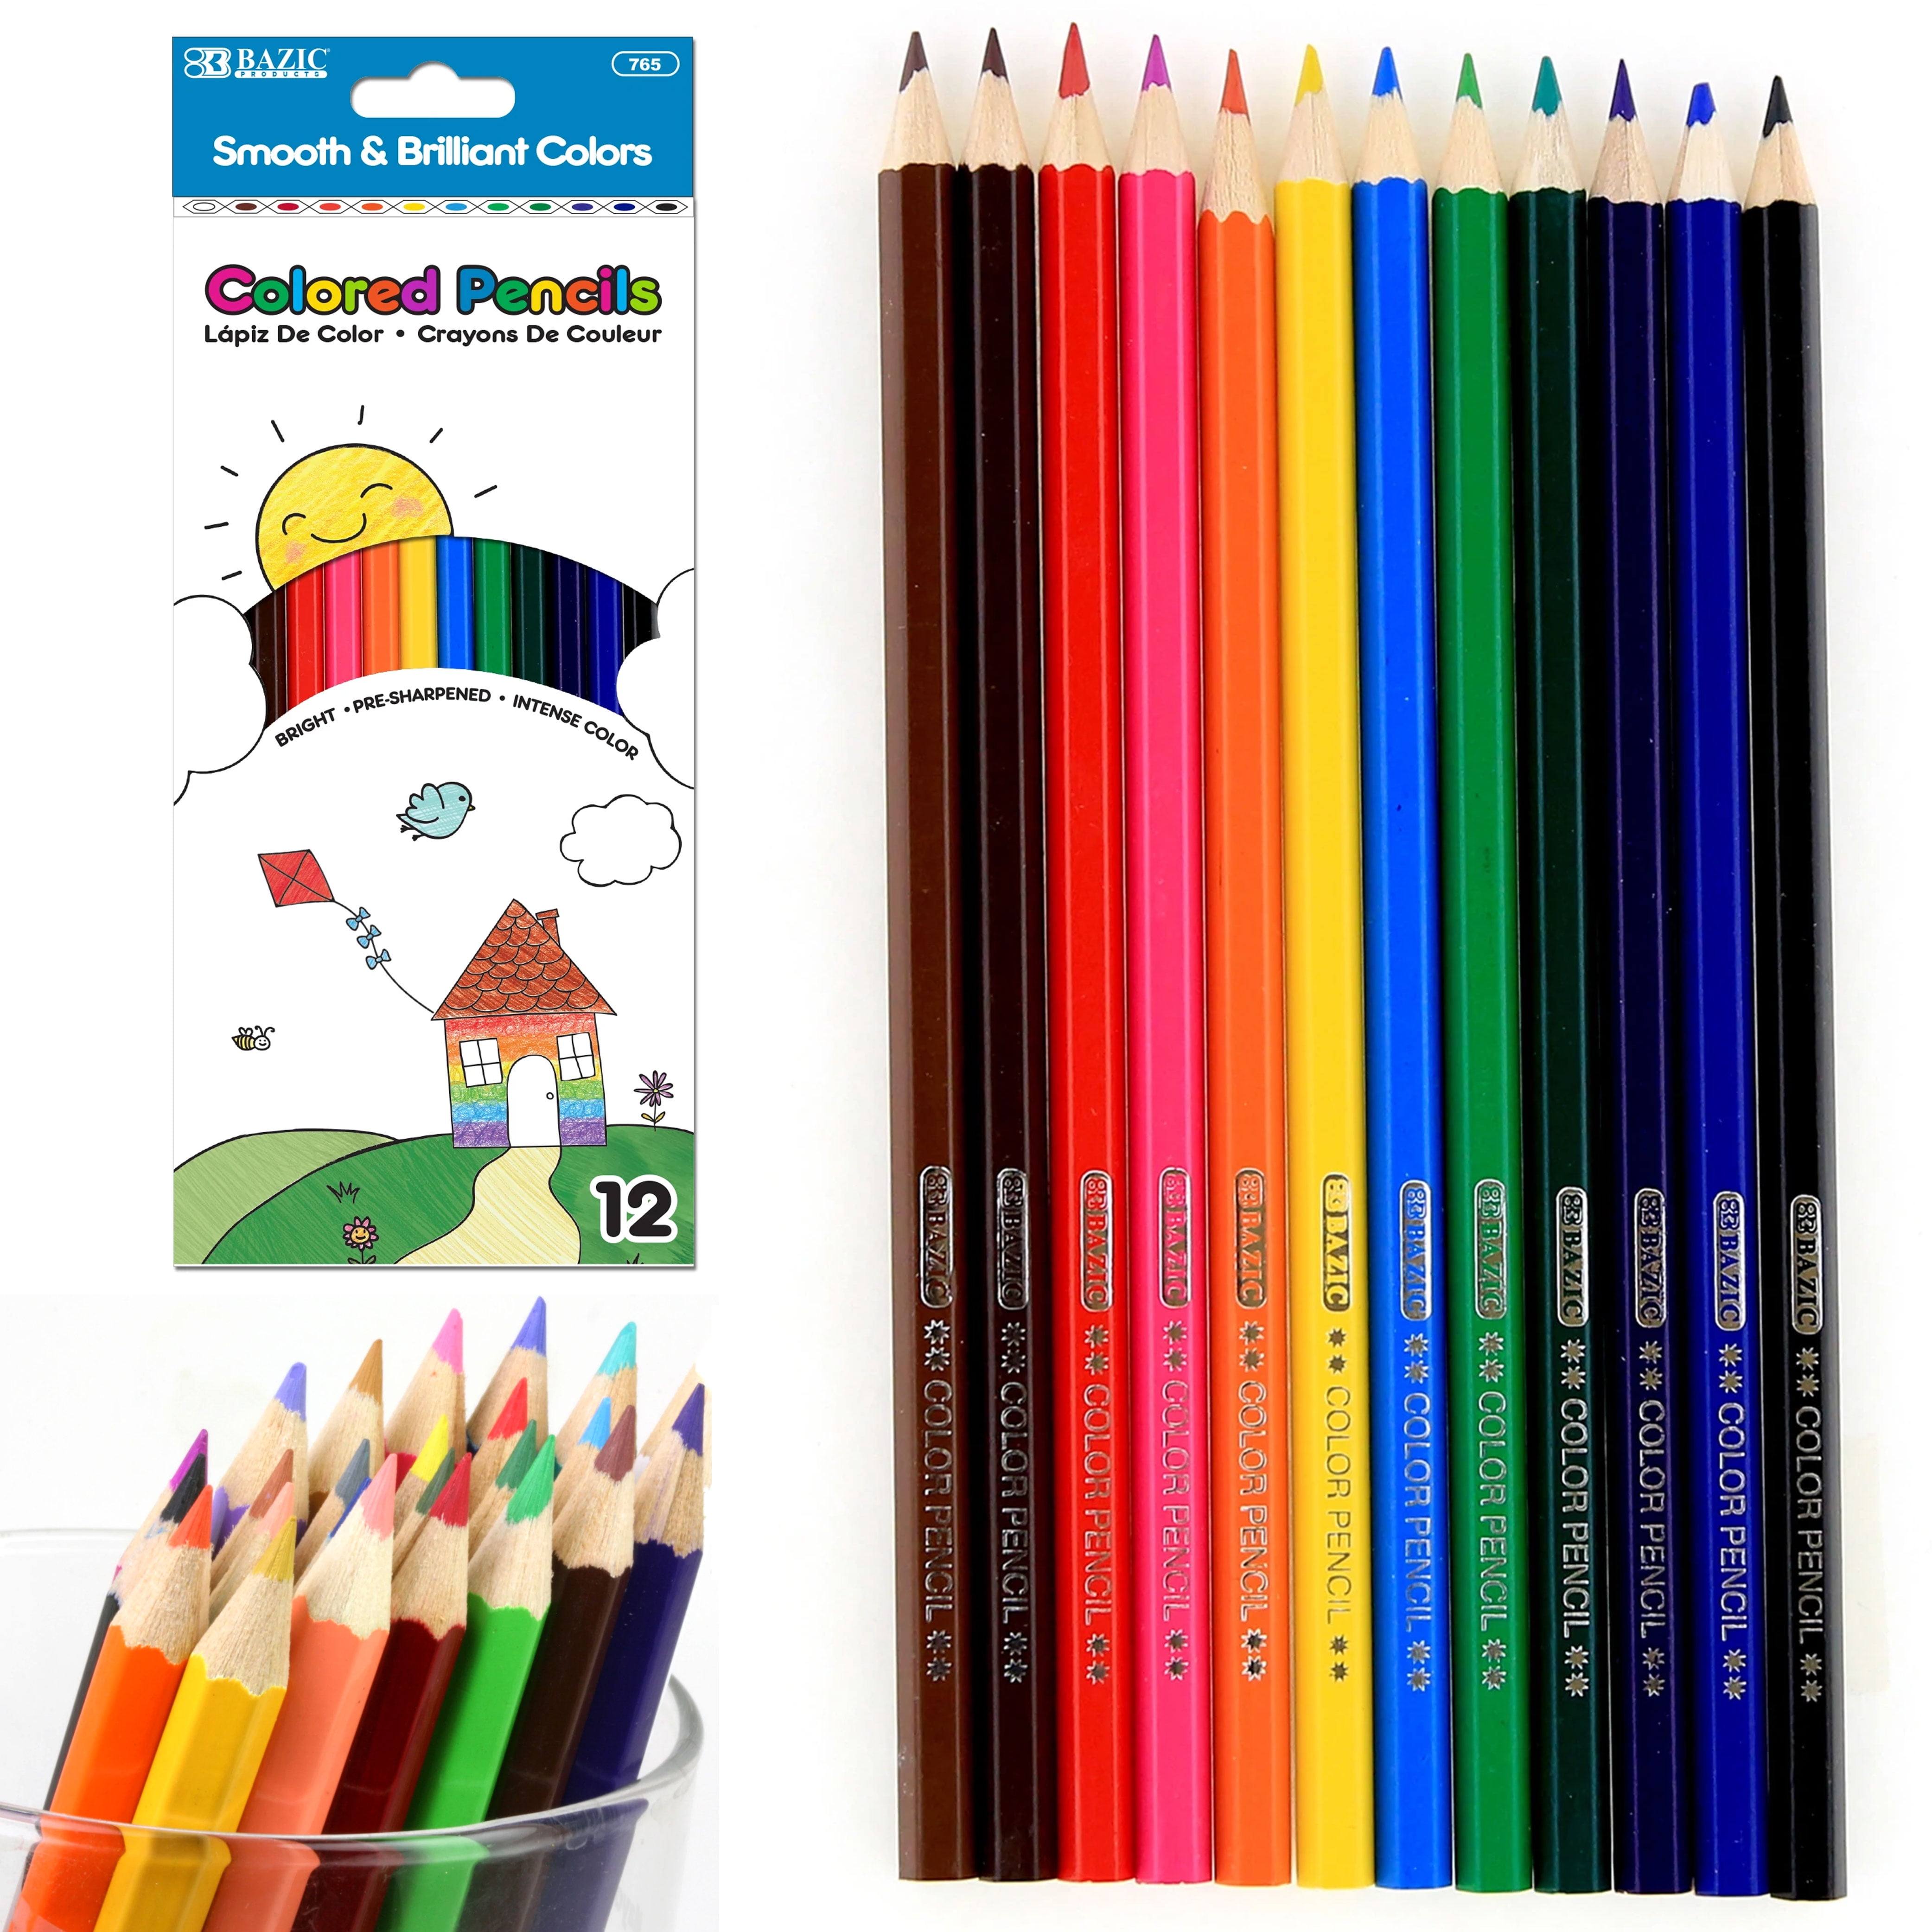 Bright Ideas Metallic Colored Pencils – World Chess Hall of Fame